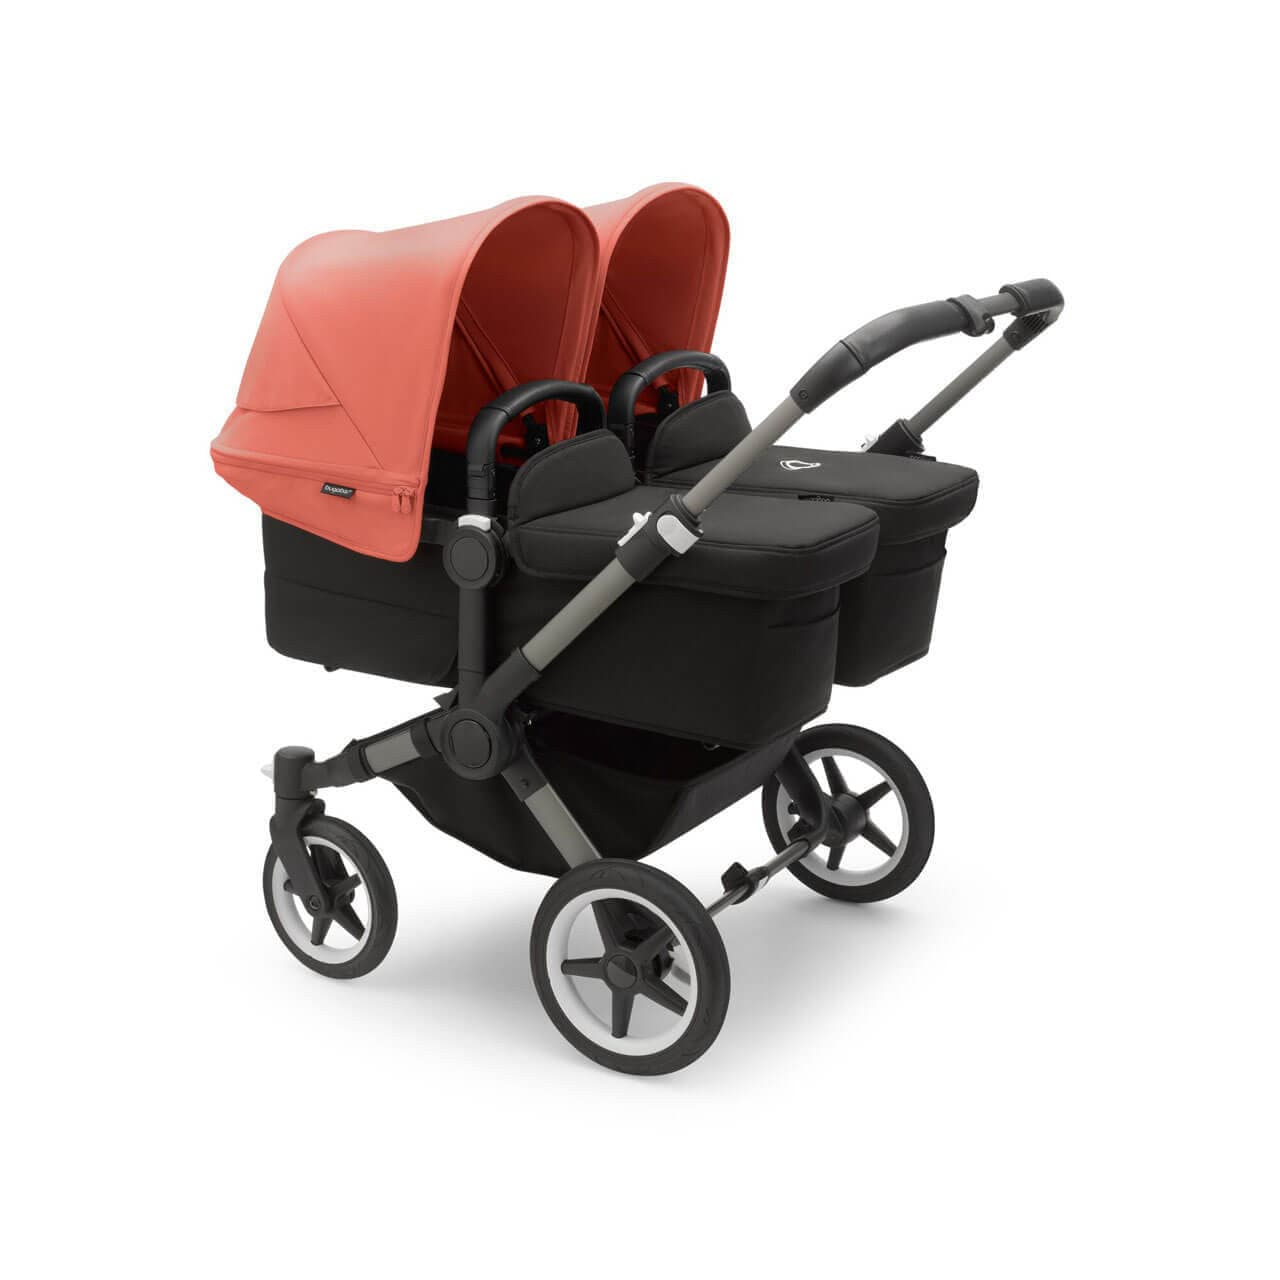 Bugaboo Donkey 5 Twin Pushchair on Graphite/Black Chassis - Choose Your Colour - Sunrise Red | For Your Little One